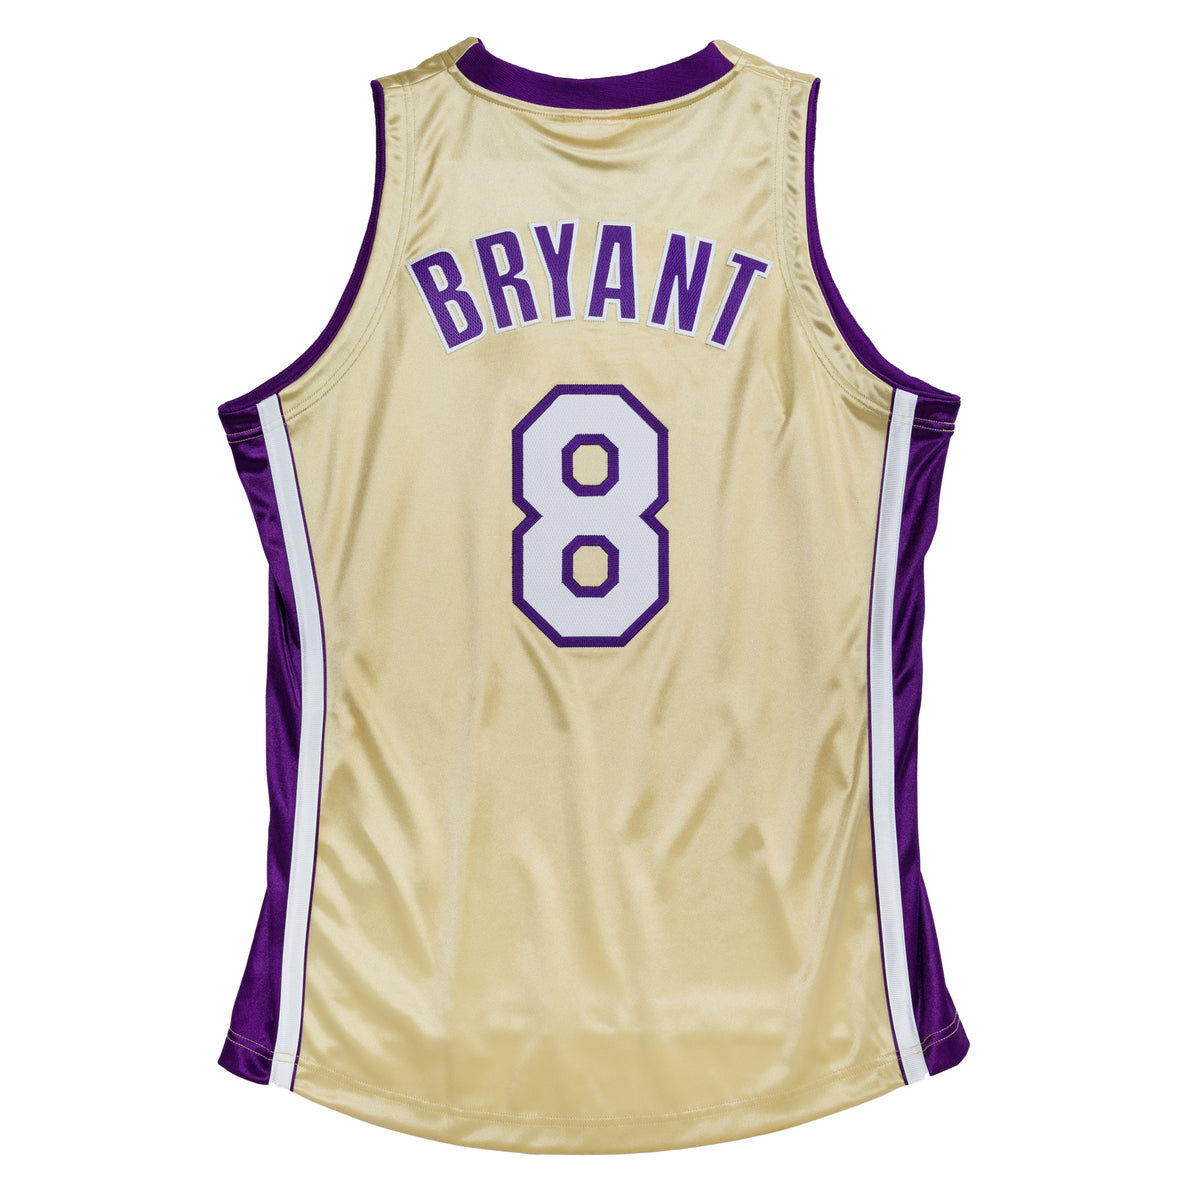 NBA Authentic Jersey Lakers 96 Kobe Bryant Hall of Fame x Mitchell & Ness S